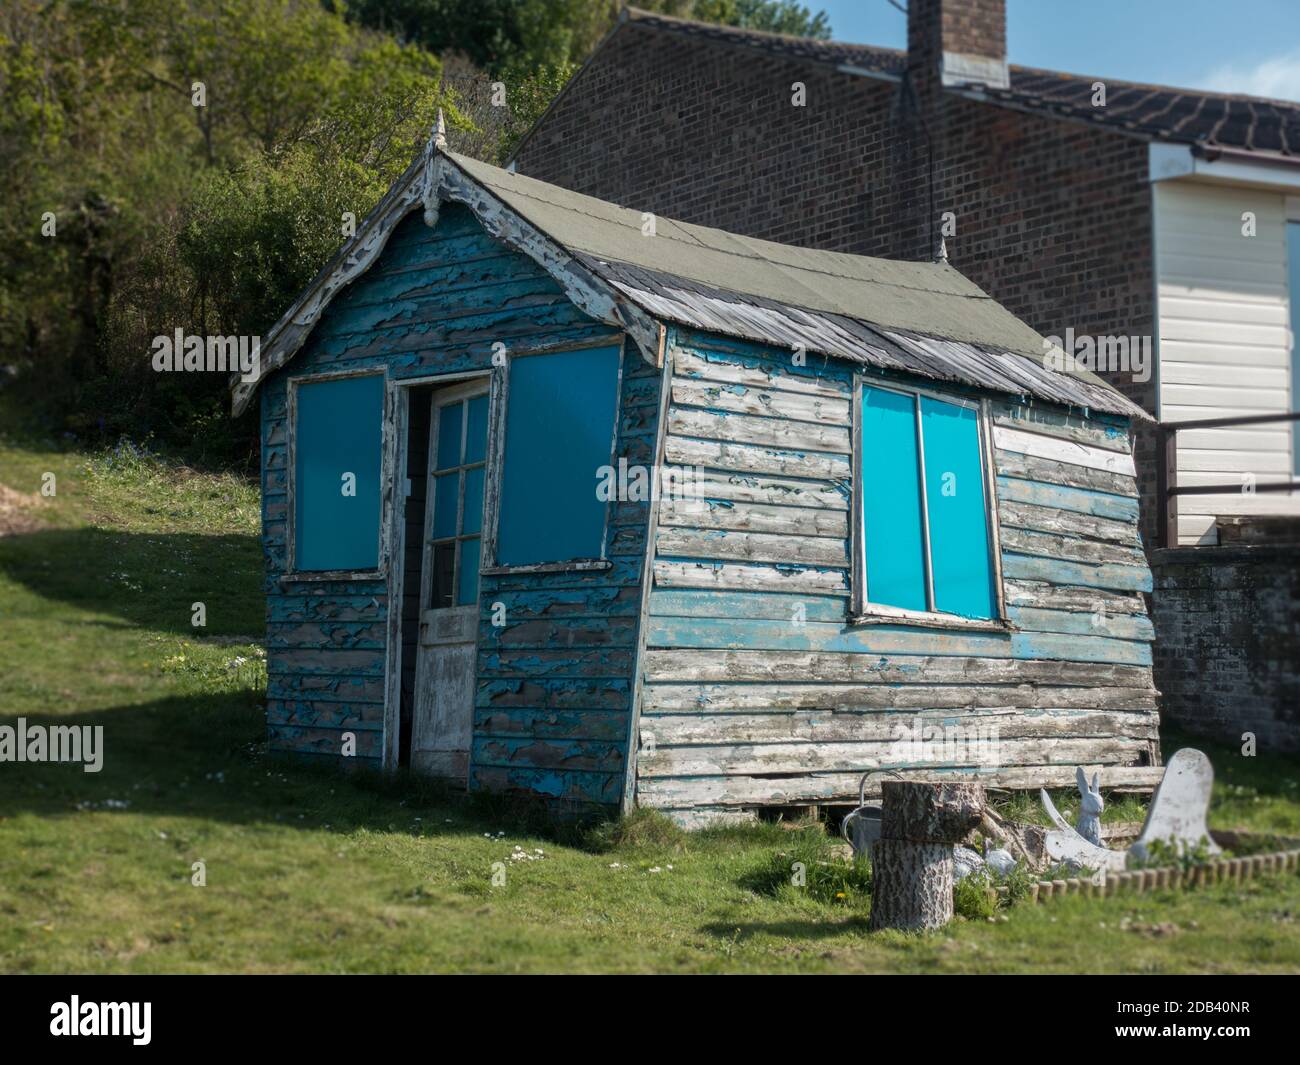 Abandoned derelict bending twisting contorting outside garden shed on grass with blue shutters blue sky sunny day Stock Photo